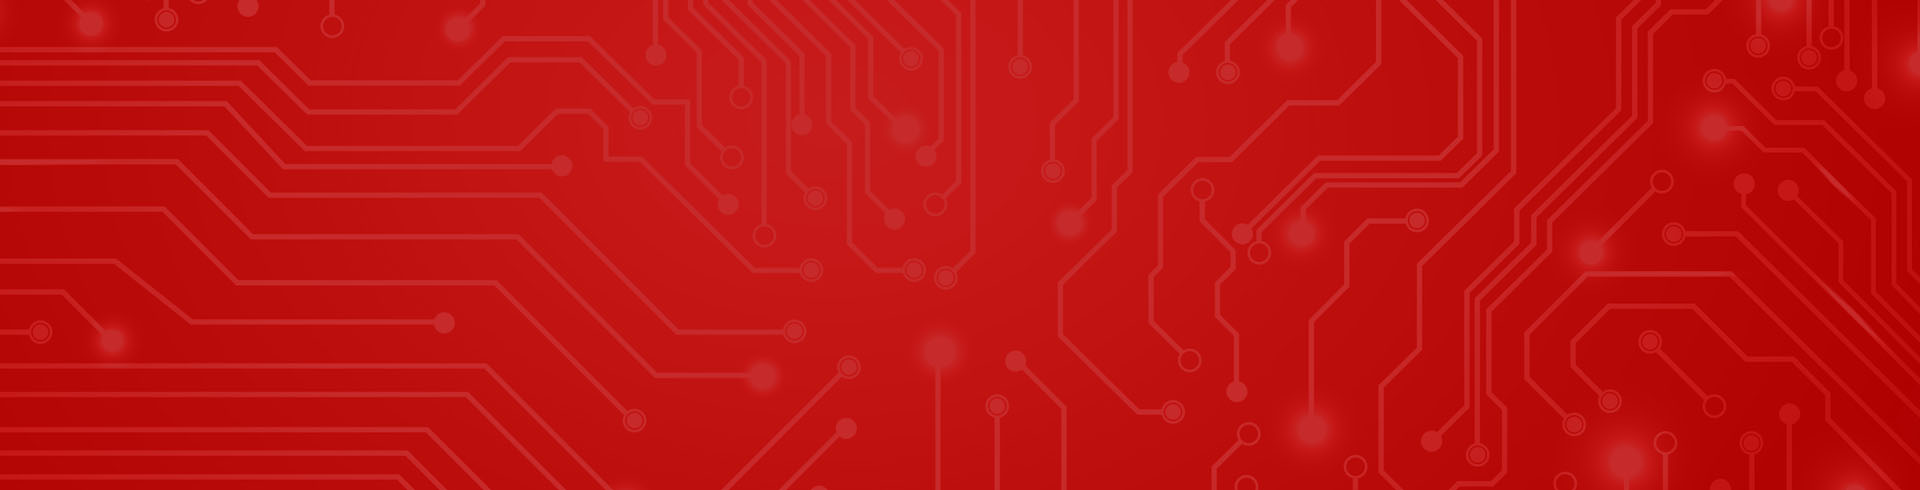 Circuits on a red background